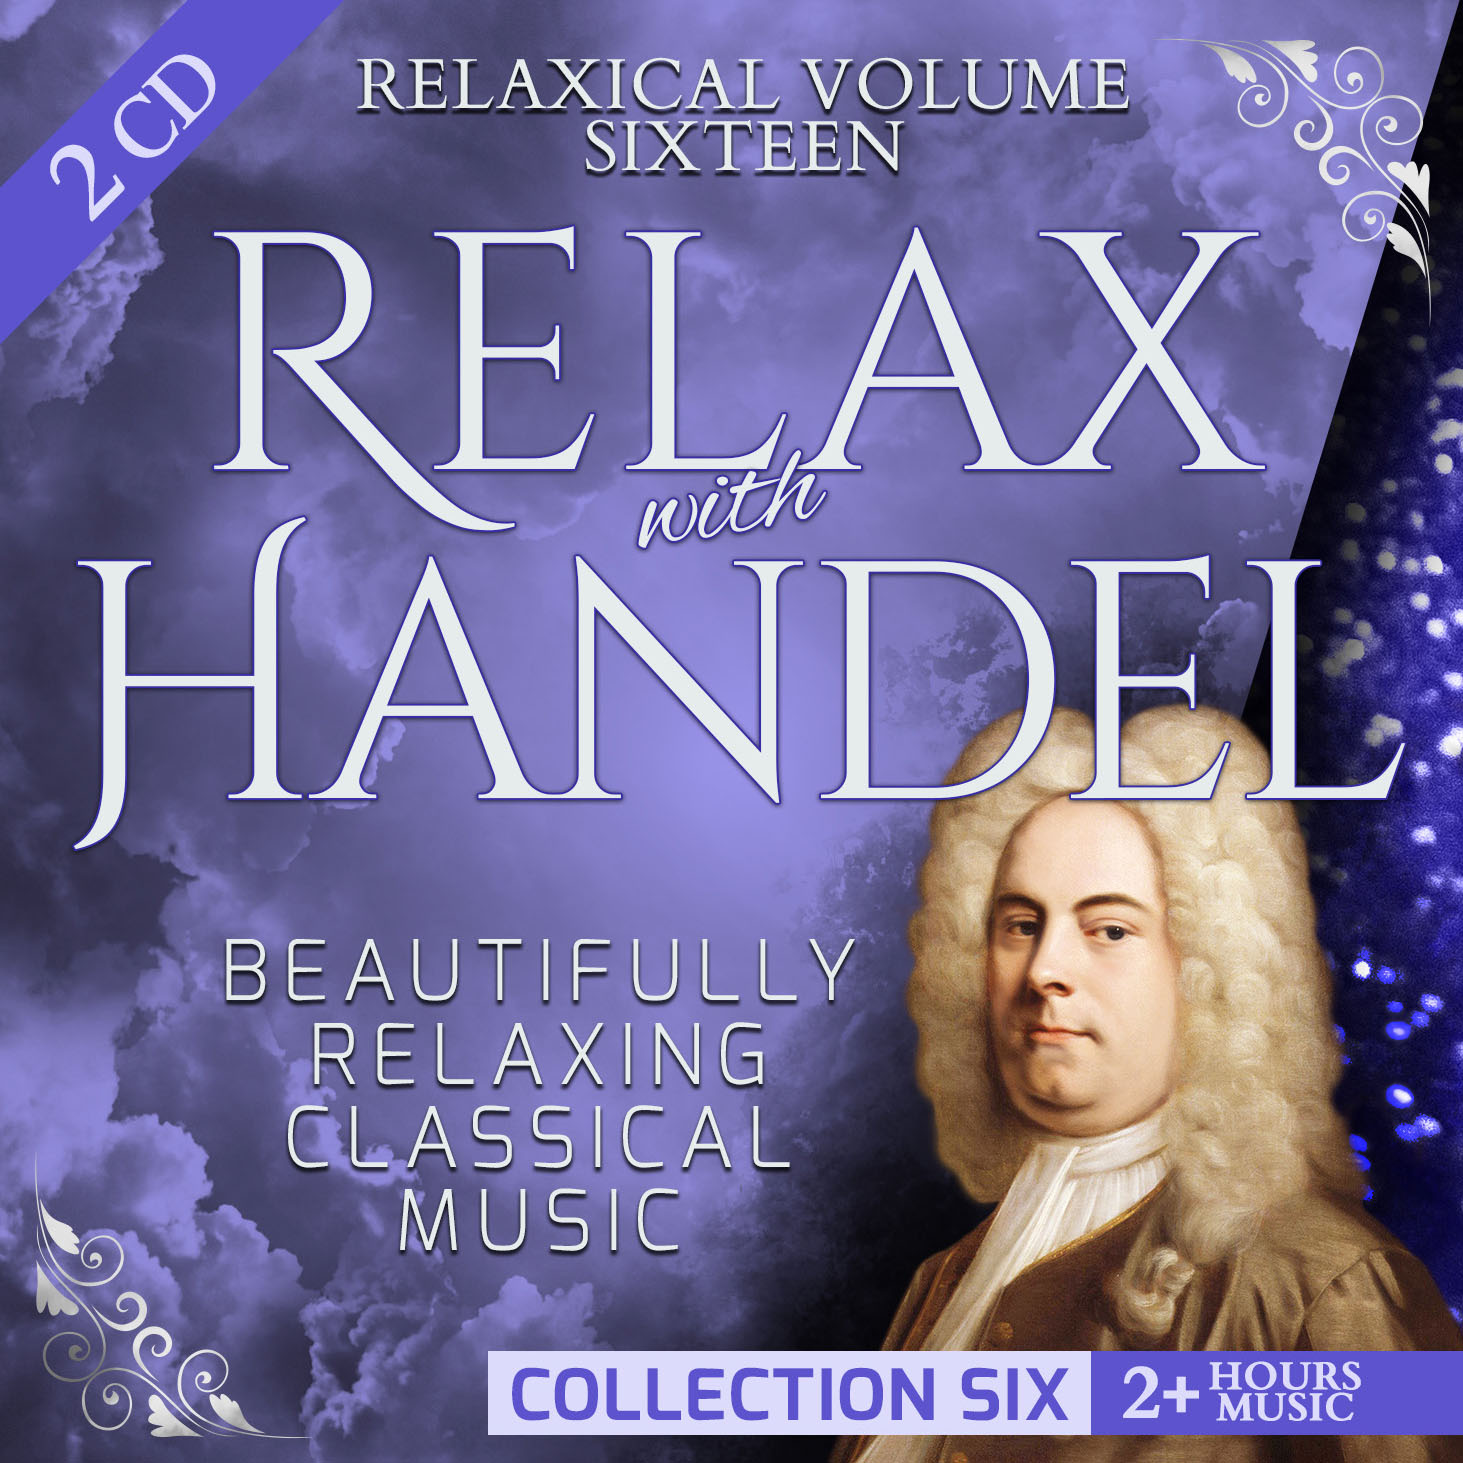 Volume 16 - Relax with Handel (Collection Six): Beautifully Relaxing Classical Music